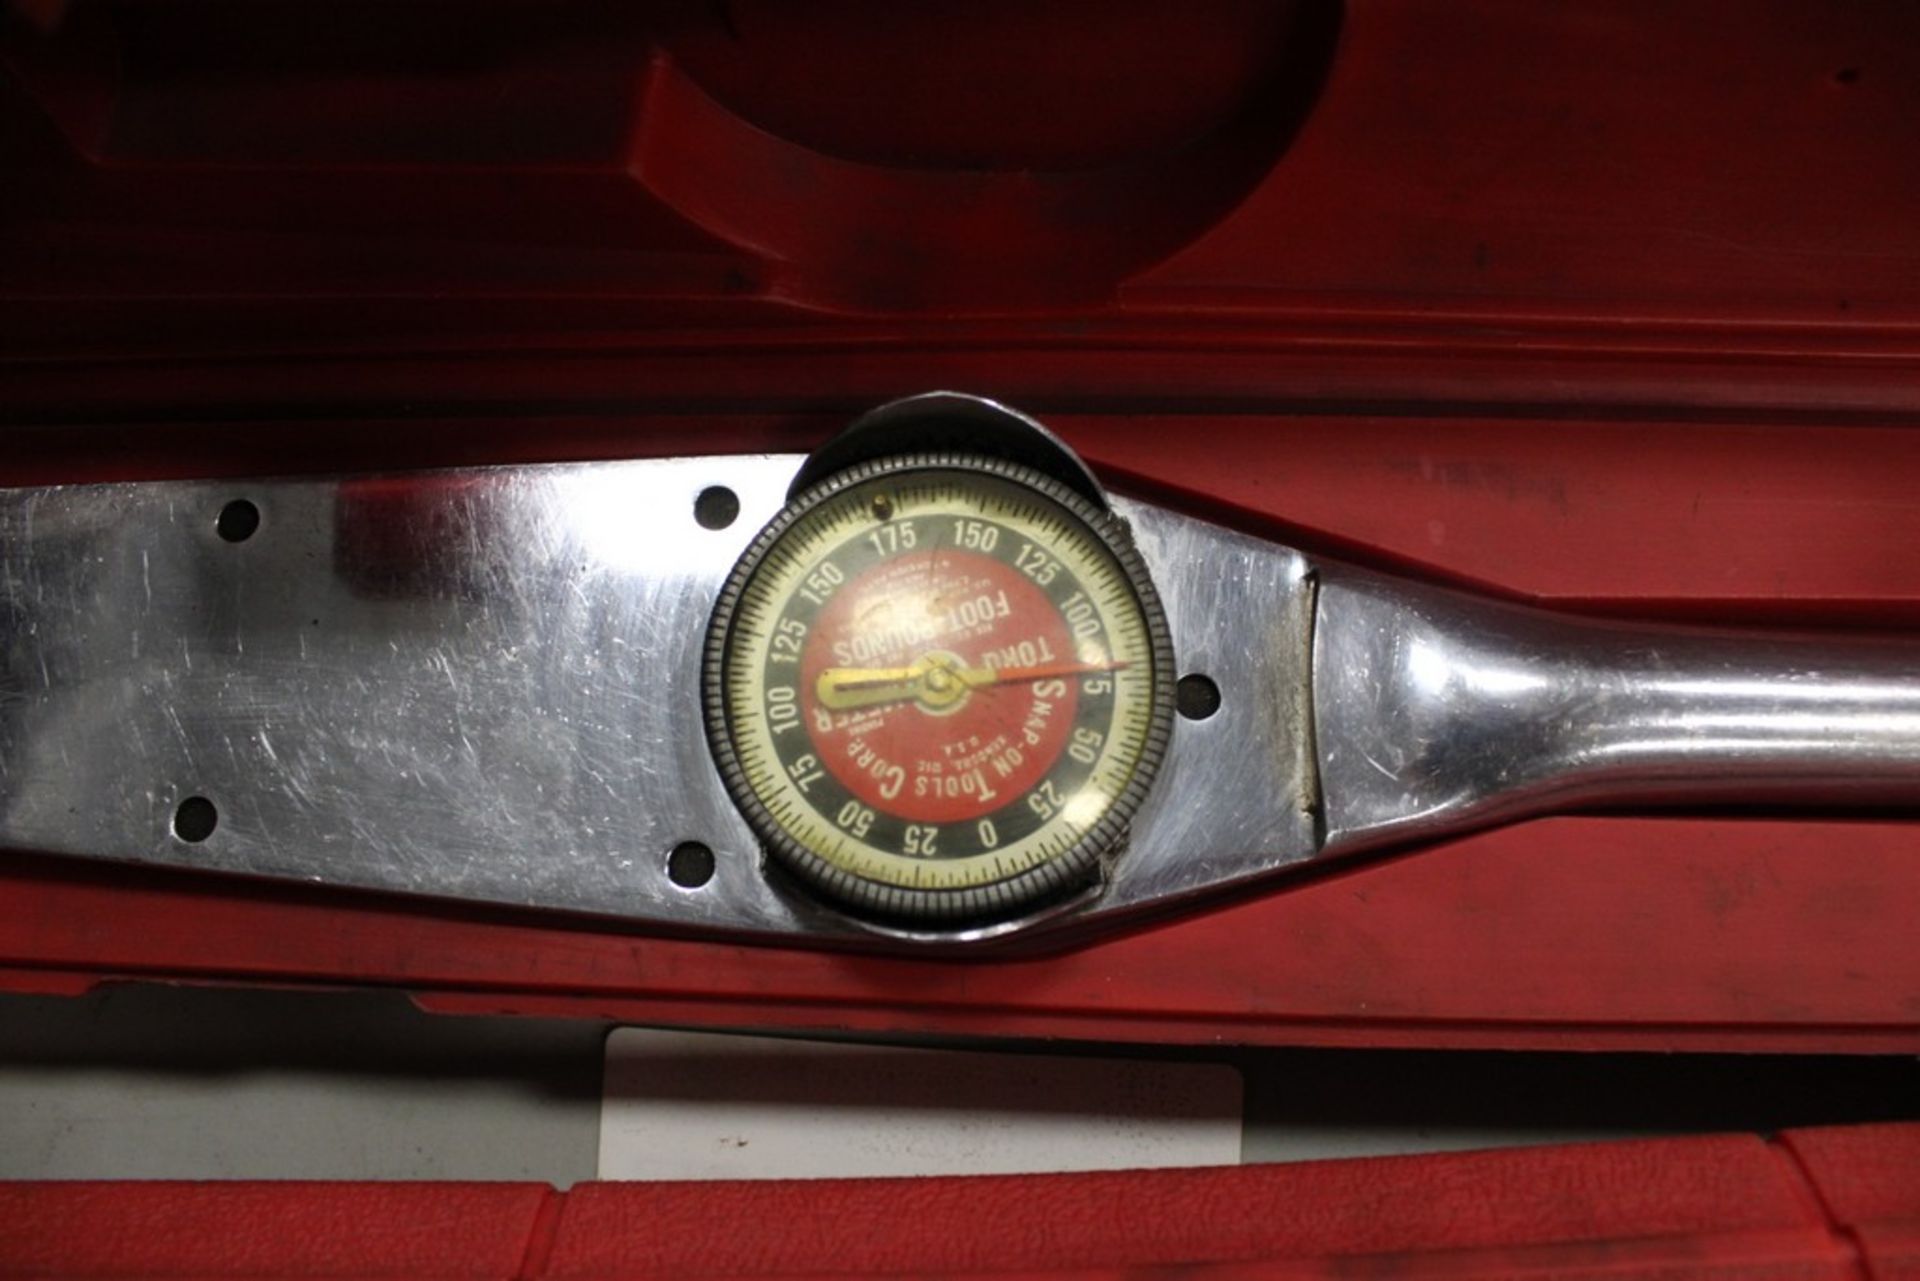 SNAP-ON TORQMETER 175 FT/LB 1/2" TORQUE WRENCH - Image 2 of 2